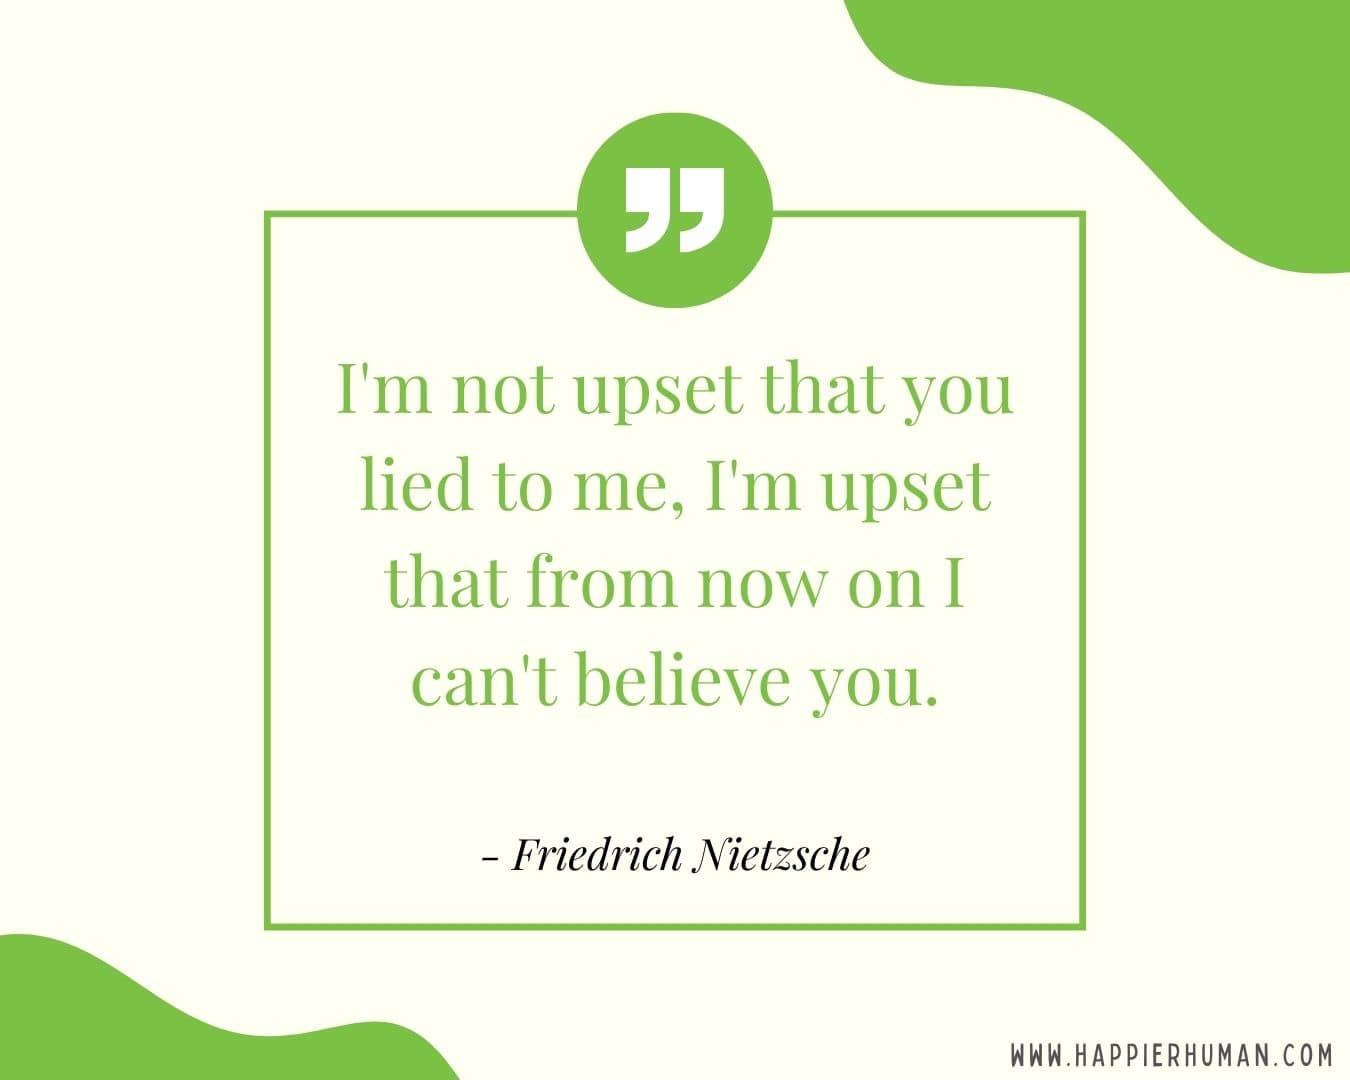 Broken Trust Quotes - “I'm not upset that you lied to me, I'm upset that from now on I can't believe you.” - Friedrich Nietzsche